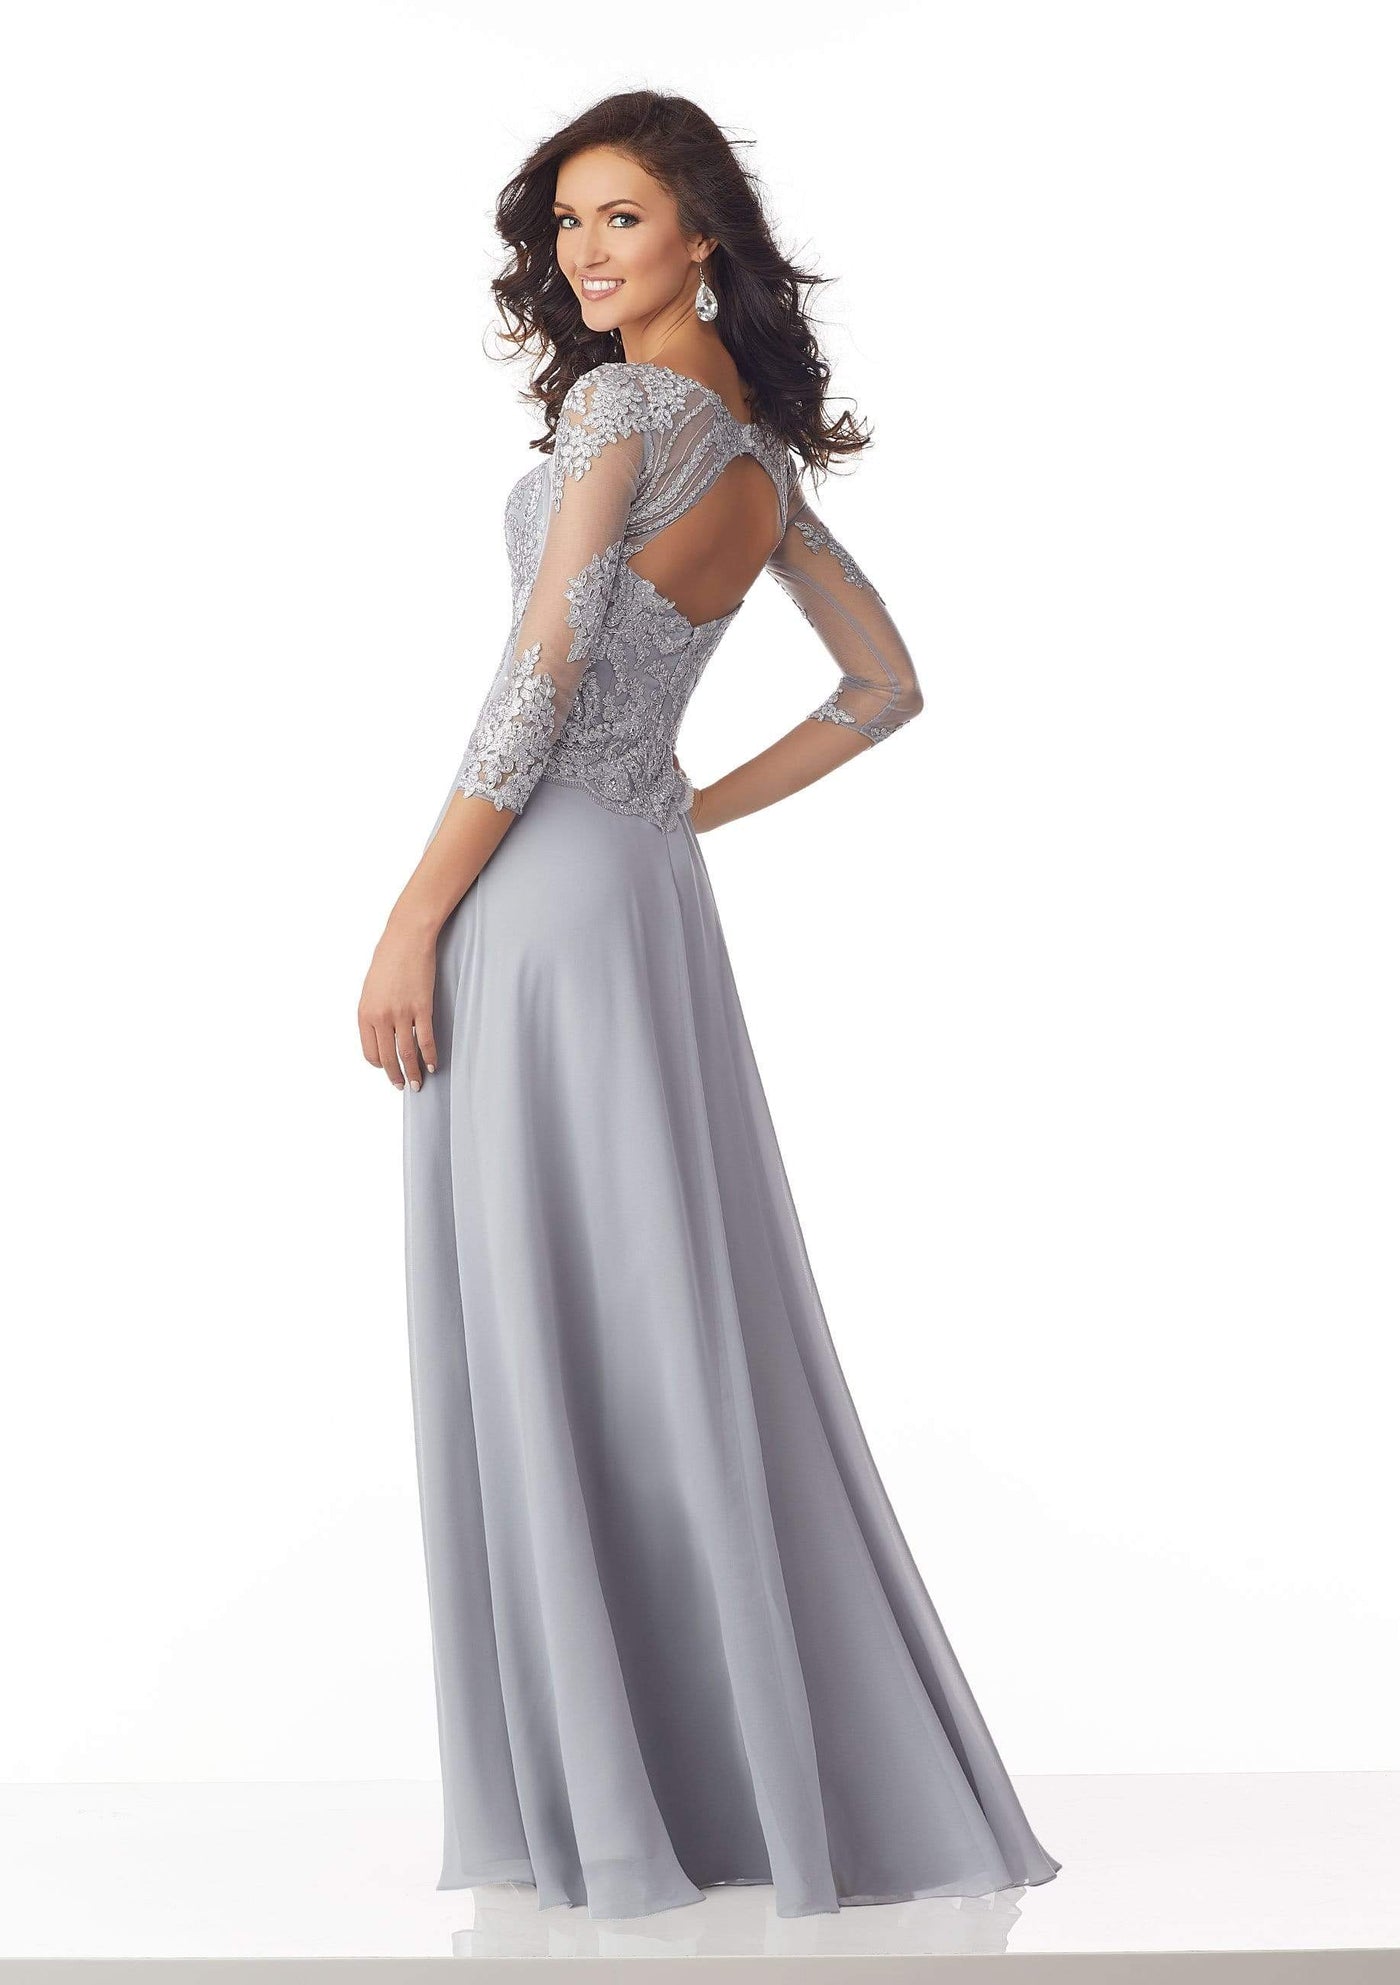 MGNY By Mori Lee - 71813 Metallic Lace A-Line Evening Dress Mother of the Bride Dresses